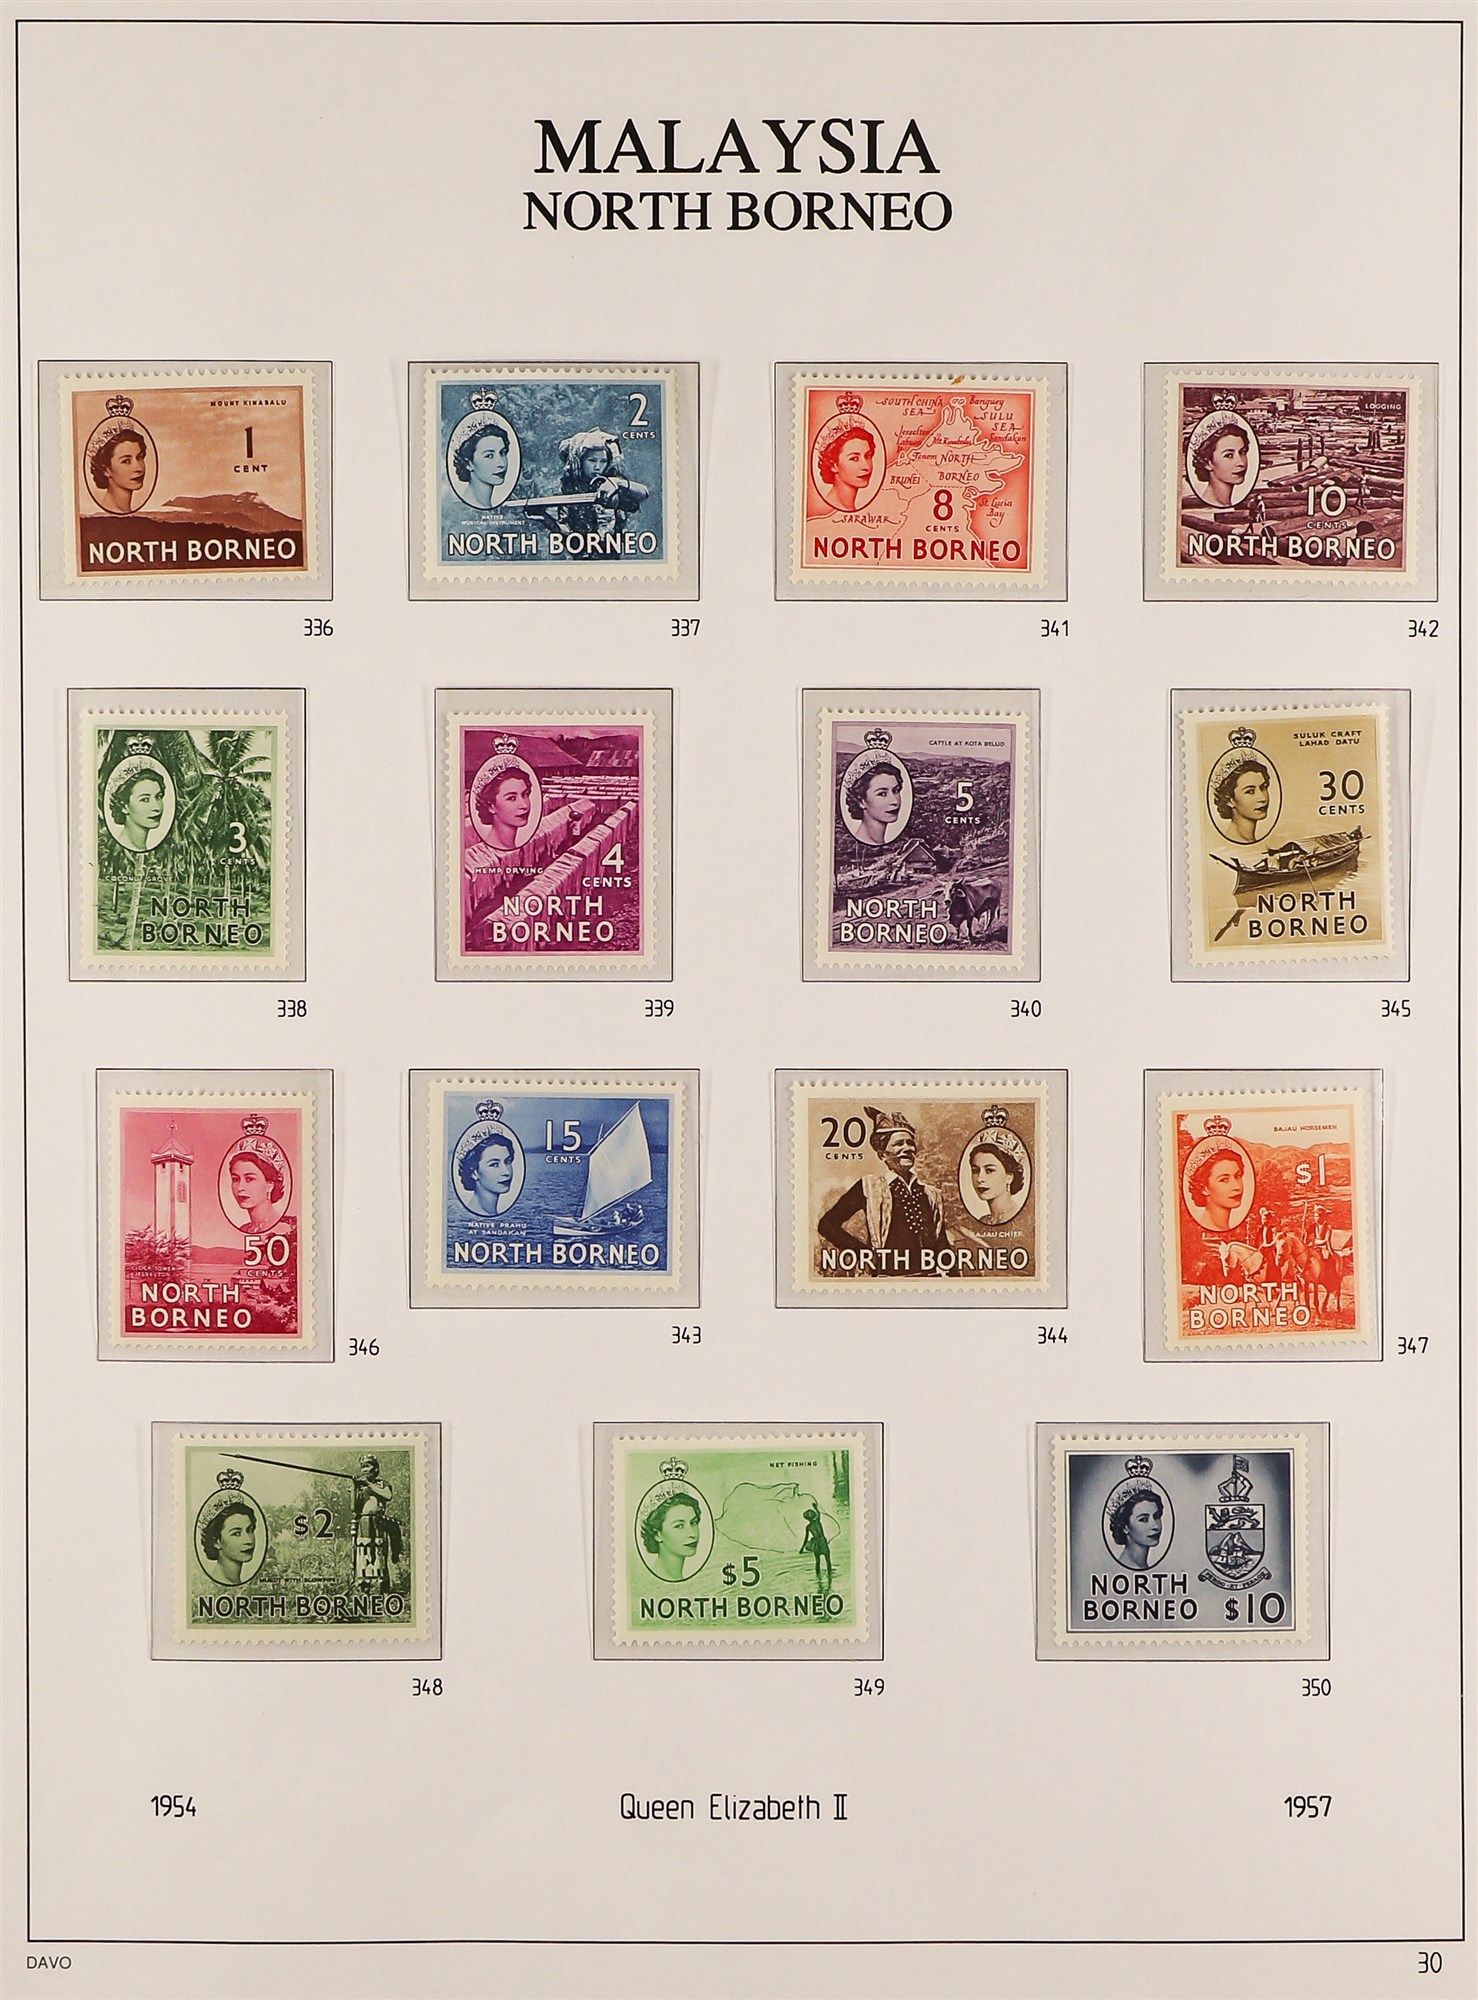 NORTH BORNEO 1953-63 COMPLETE NEVER HINGED MINT COLLECTION incl. 1954-59 & 1961 Pictorials sets etc.